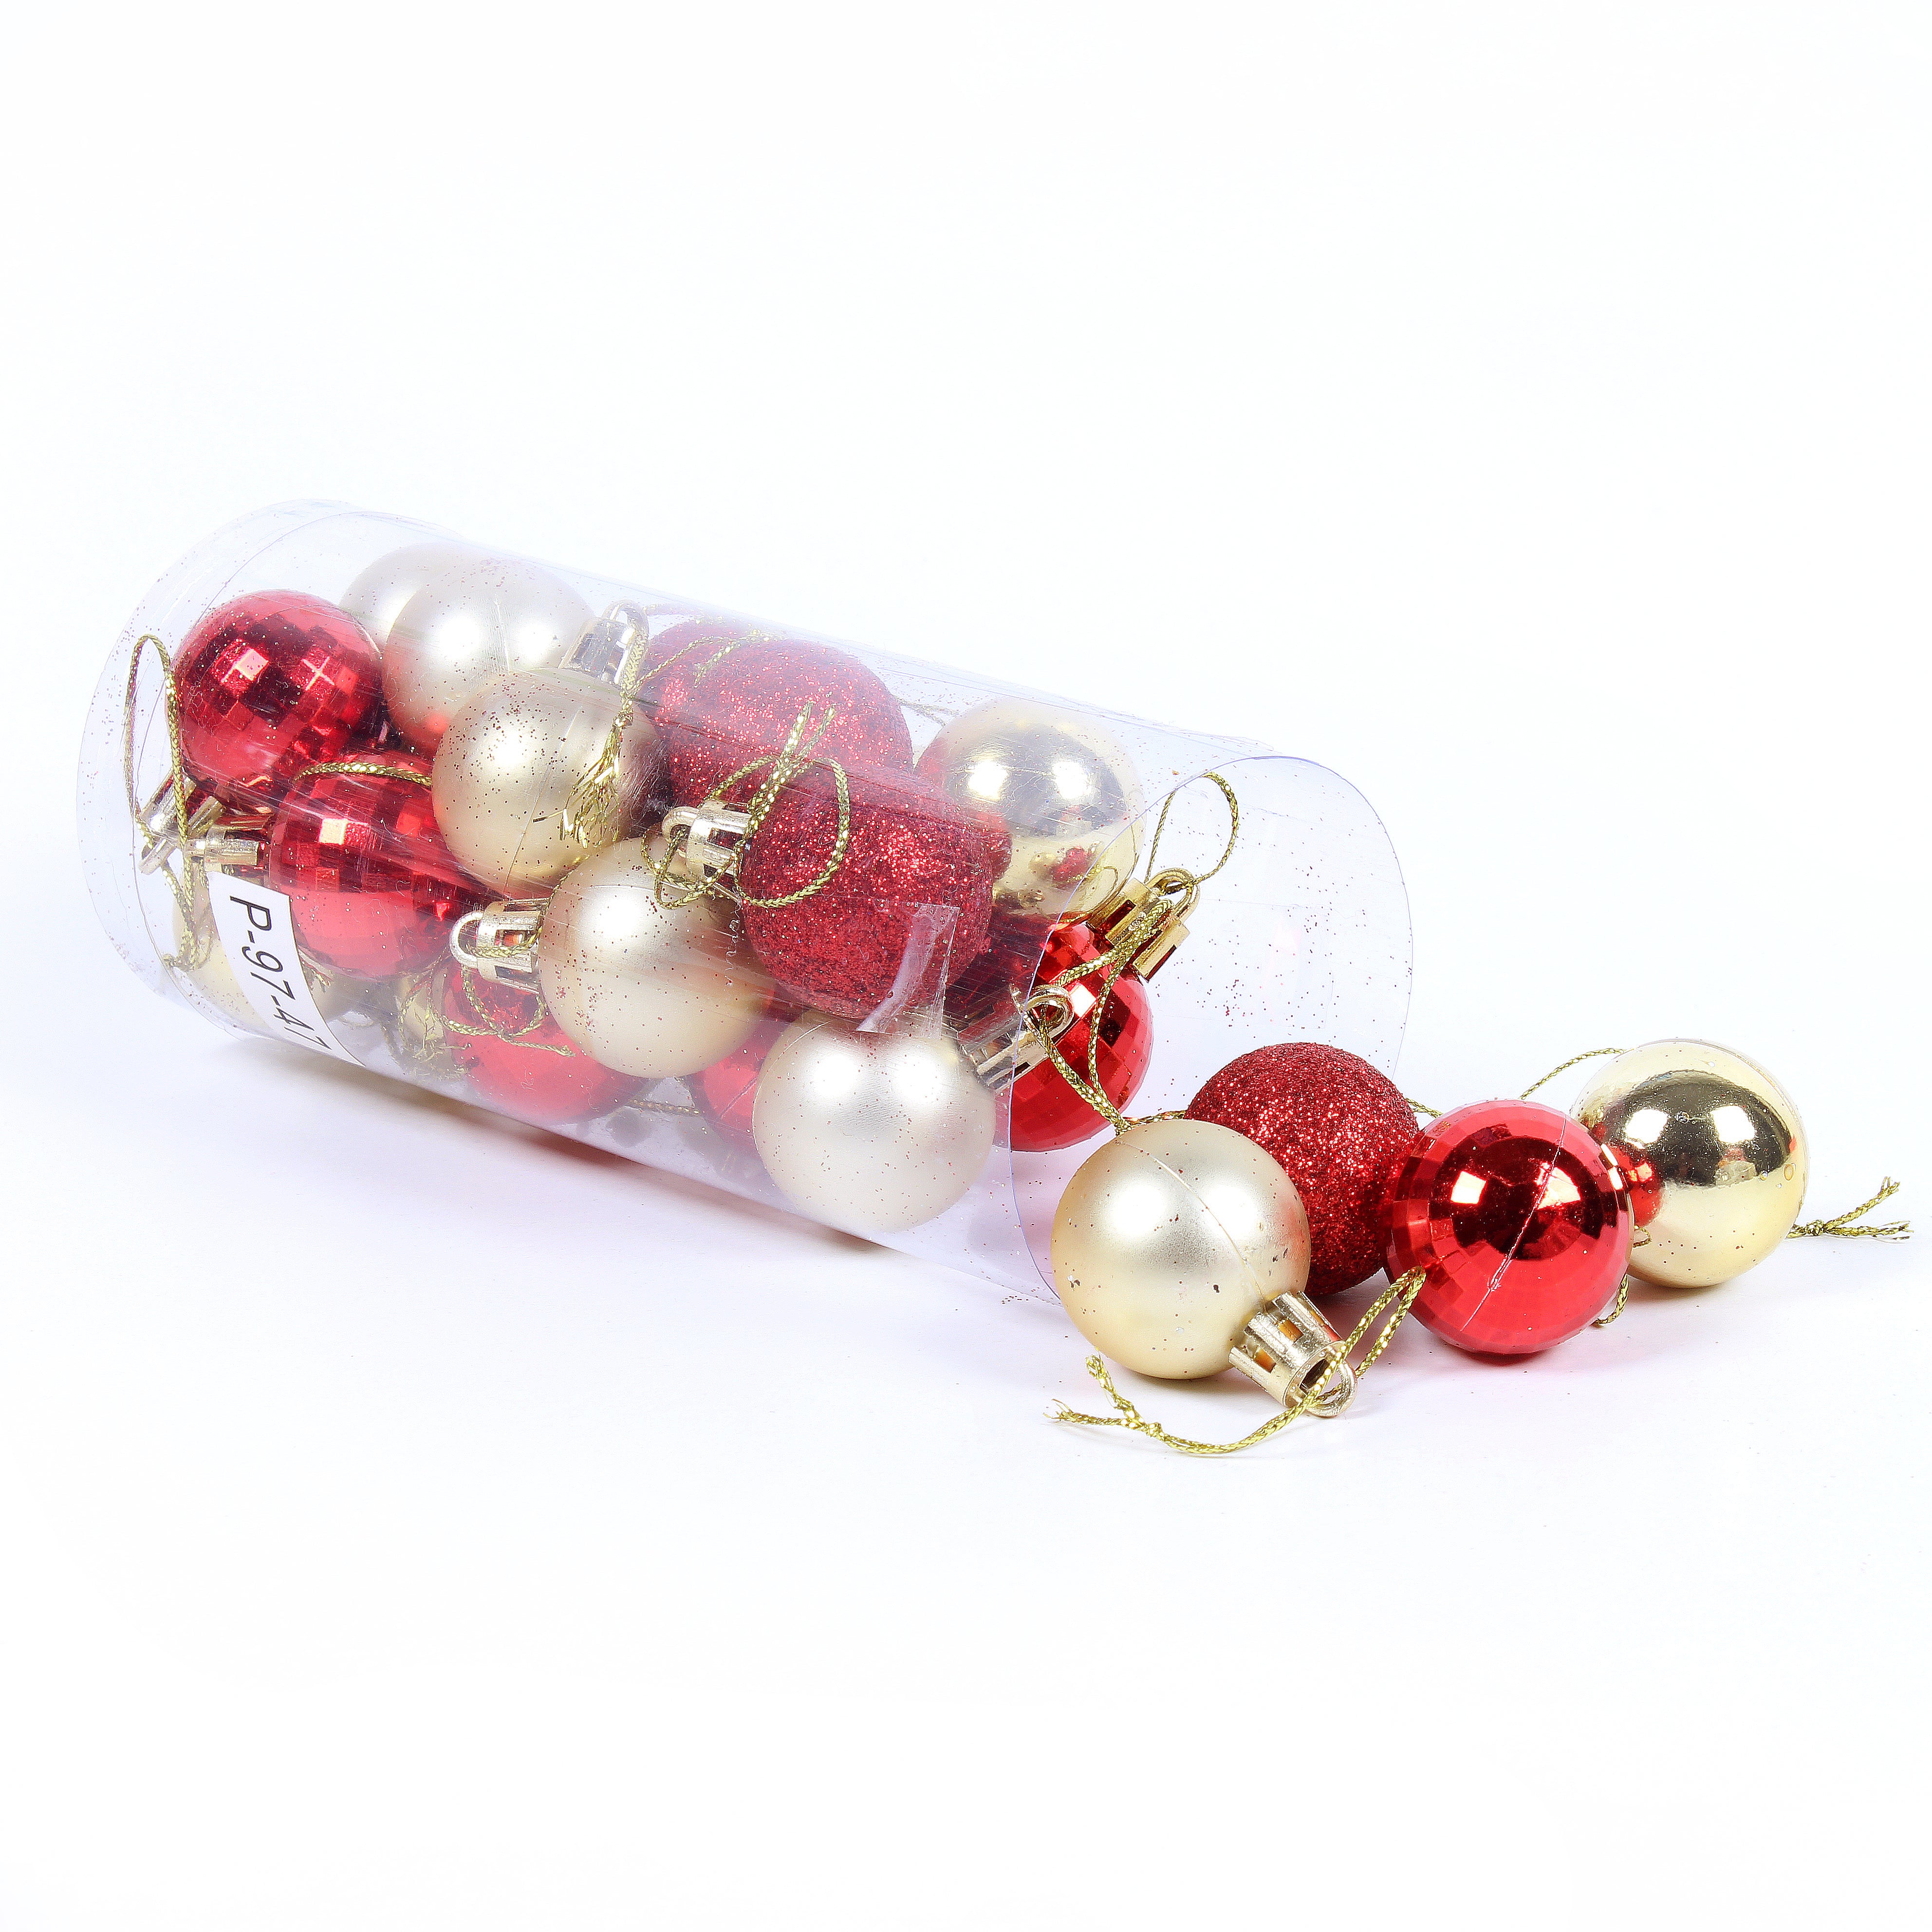 Christmas Tree Hanging Decoration Baubles Gold And Red Mix 16 X 7Cm 3cm 1Acetate Box